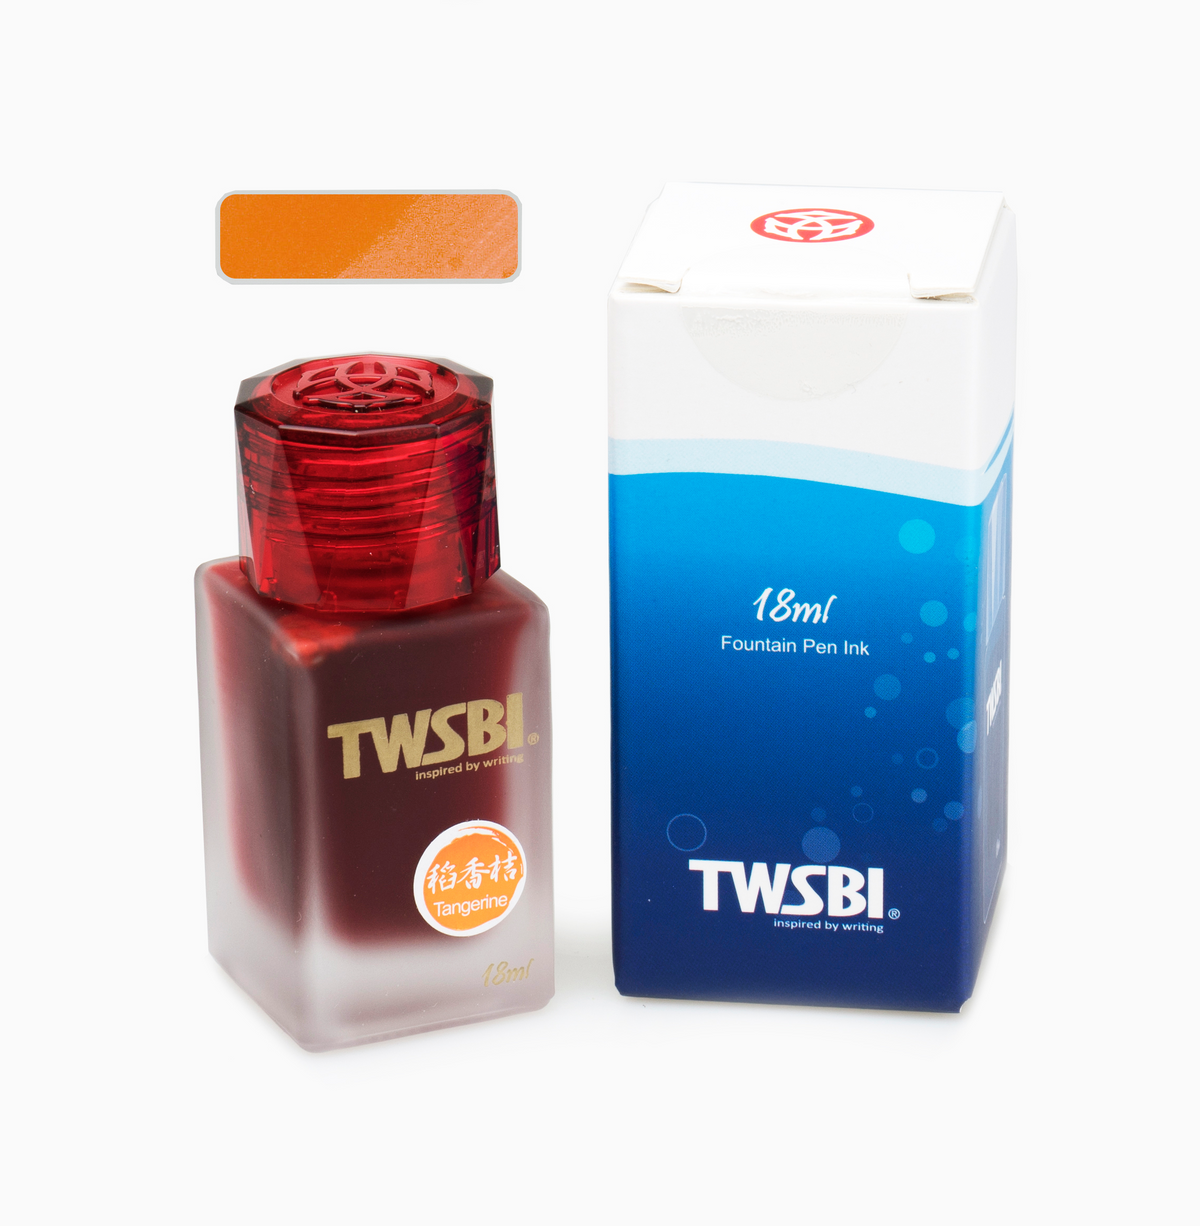 TWSBI Tangerine is a bright orange fountain pen ink. TWSBI is based in Taiwan and the ink is produced in China.